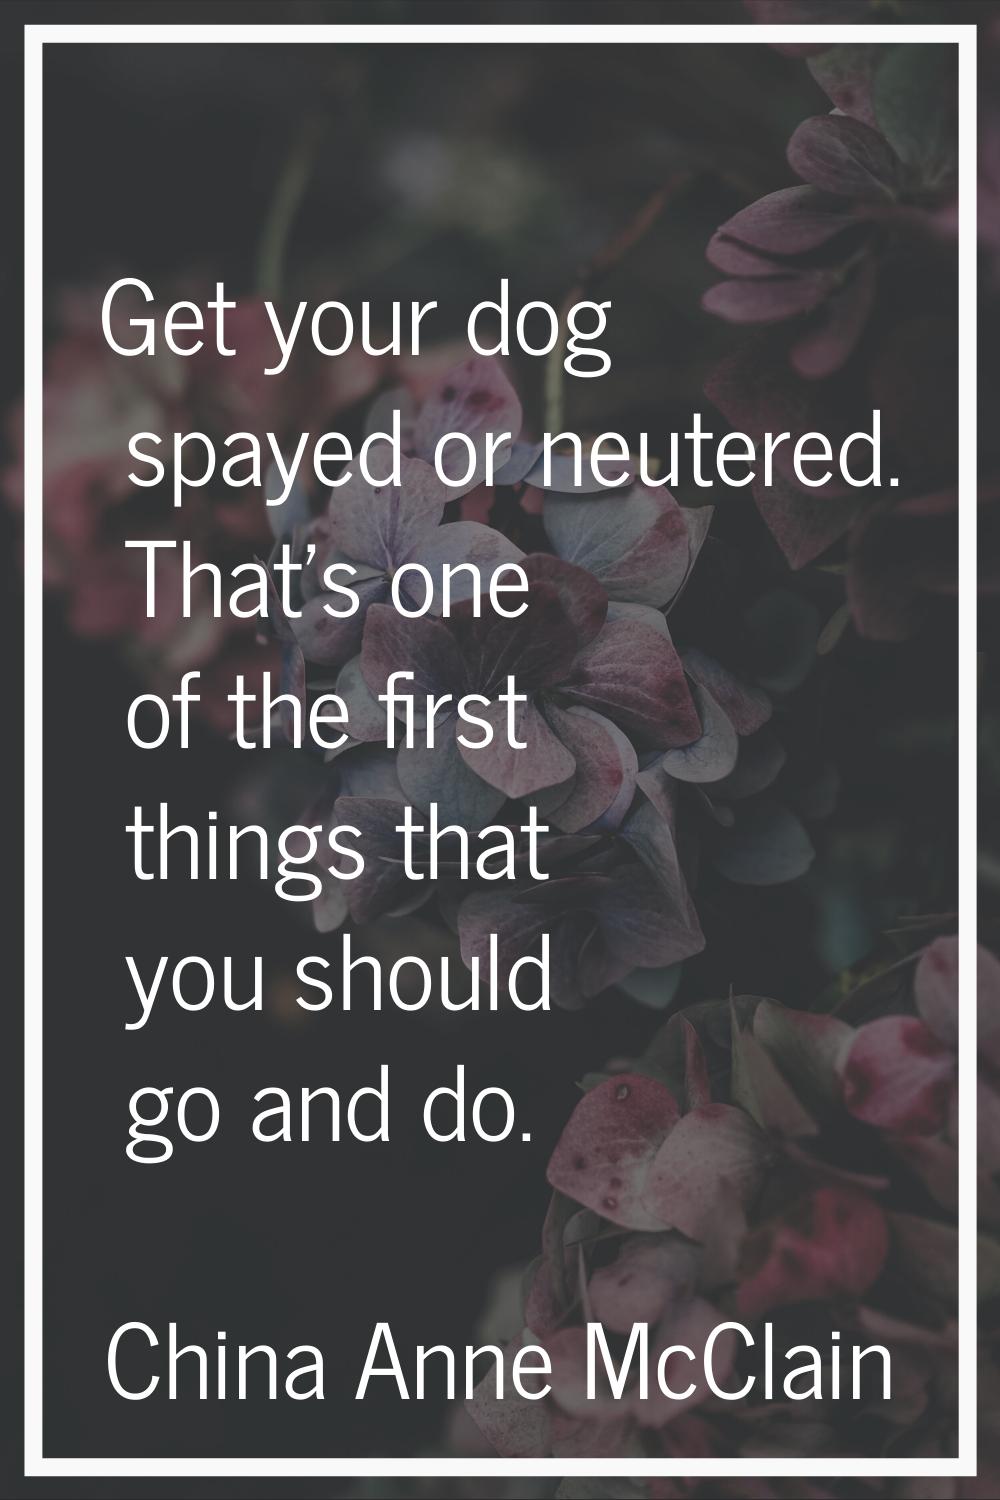 Get your dog spayed or neutered. That's one of the first things that you should go and do.